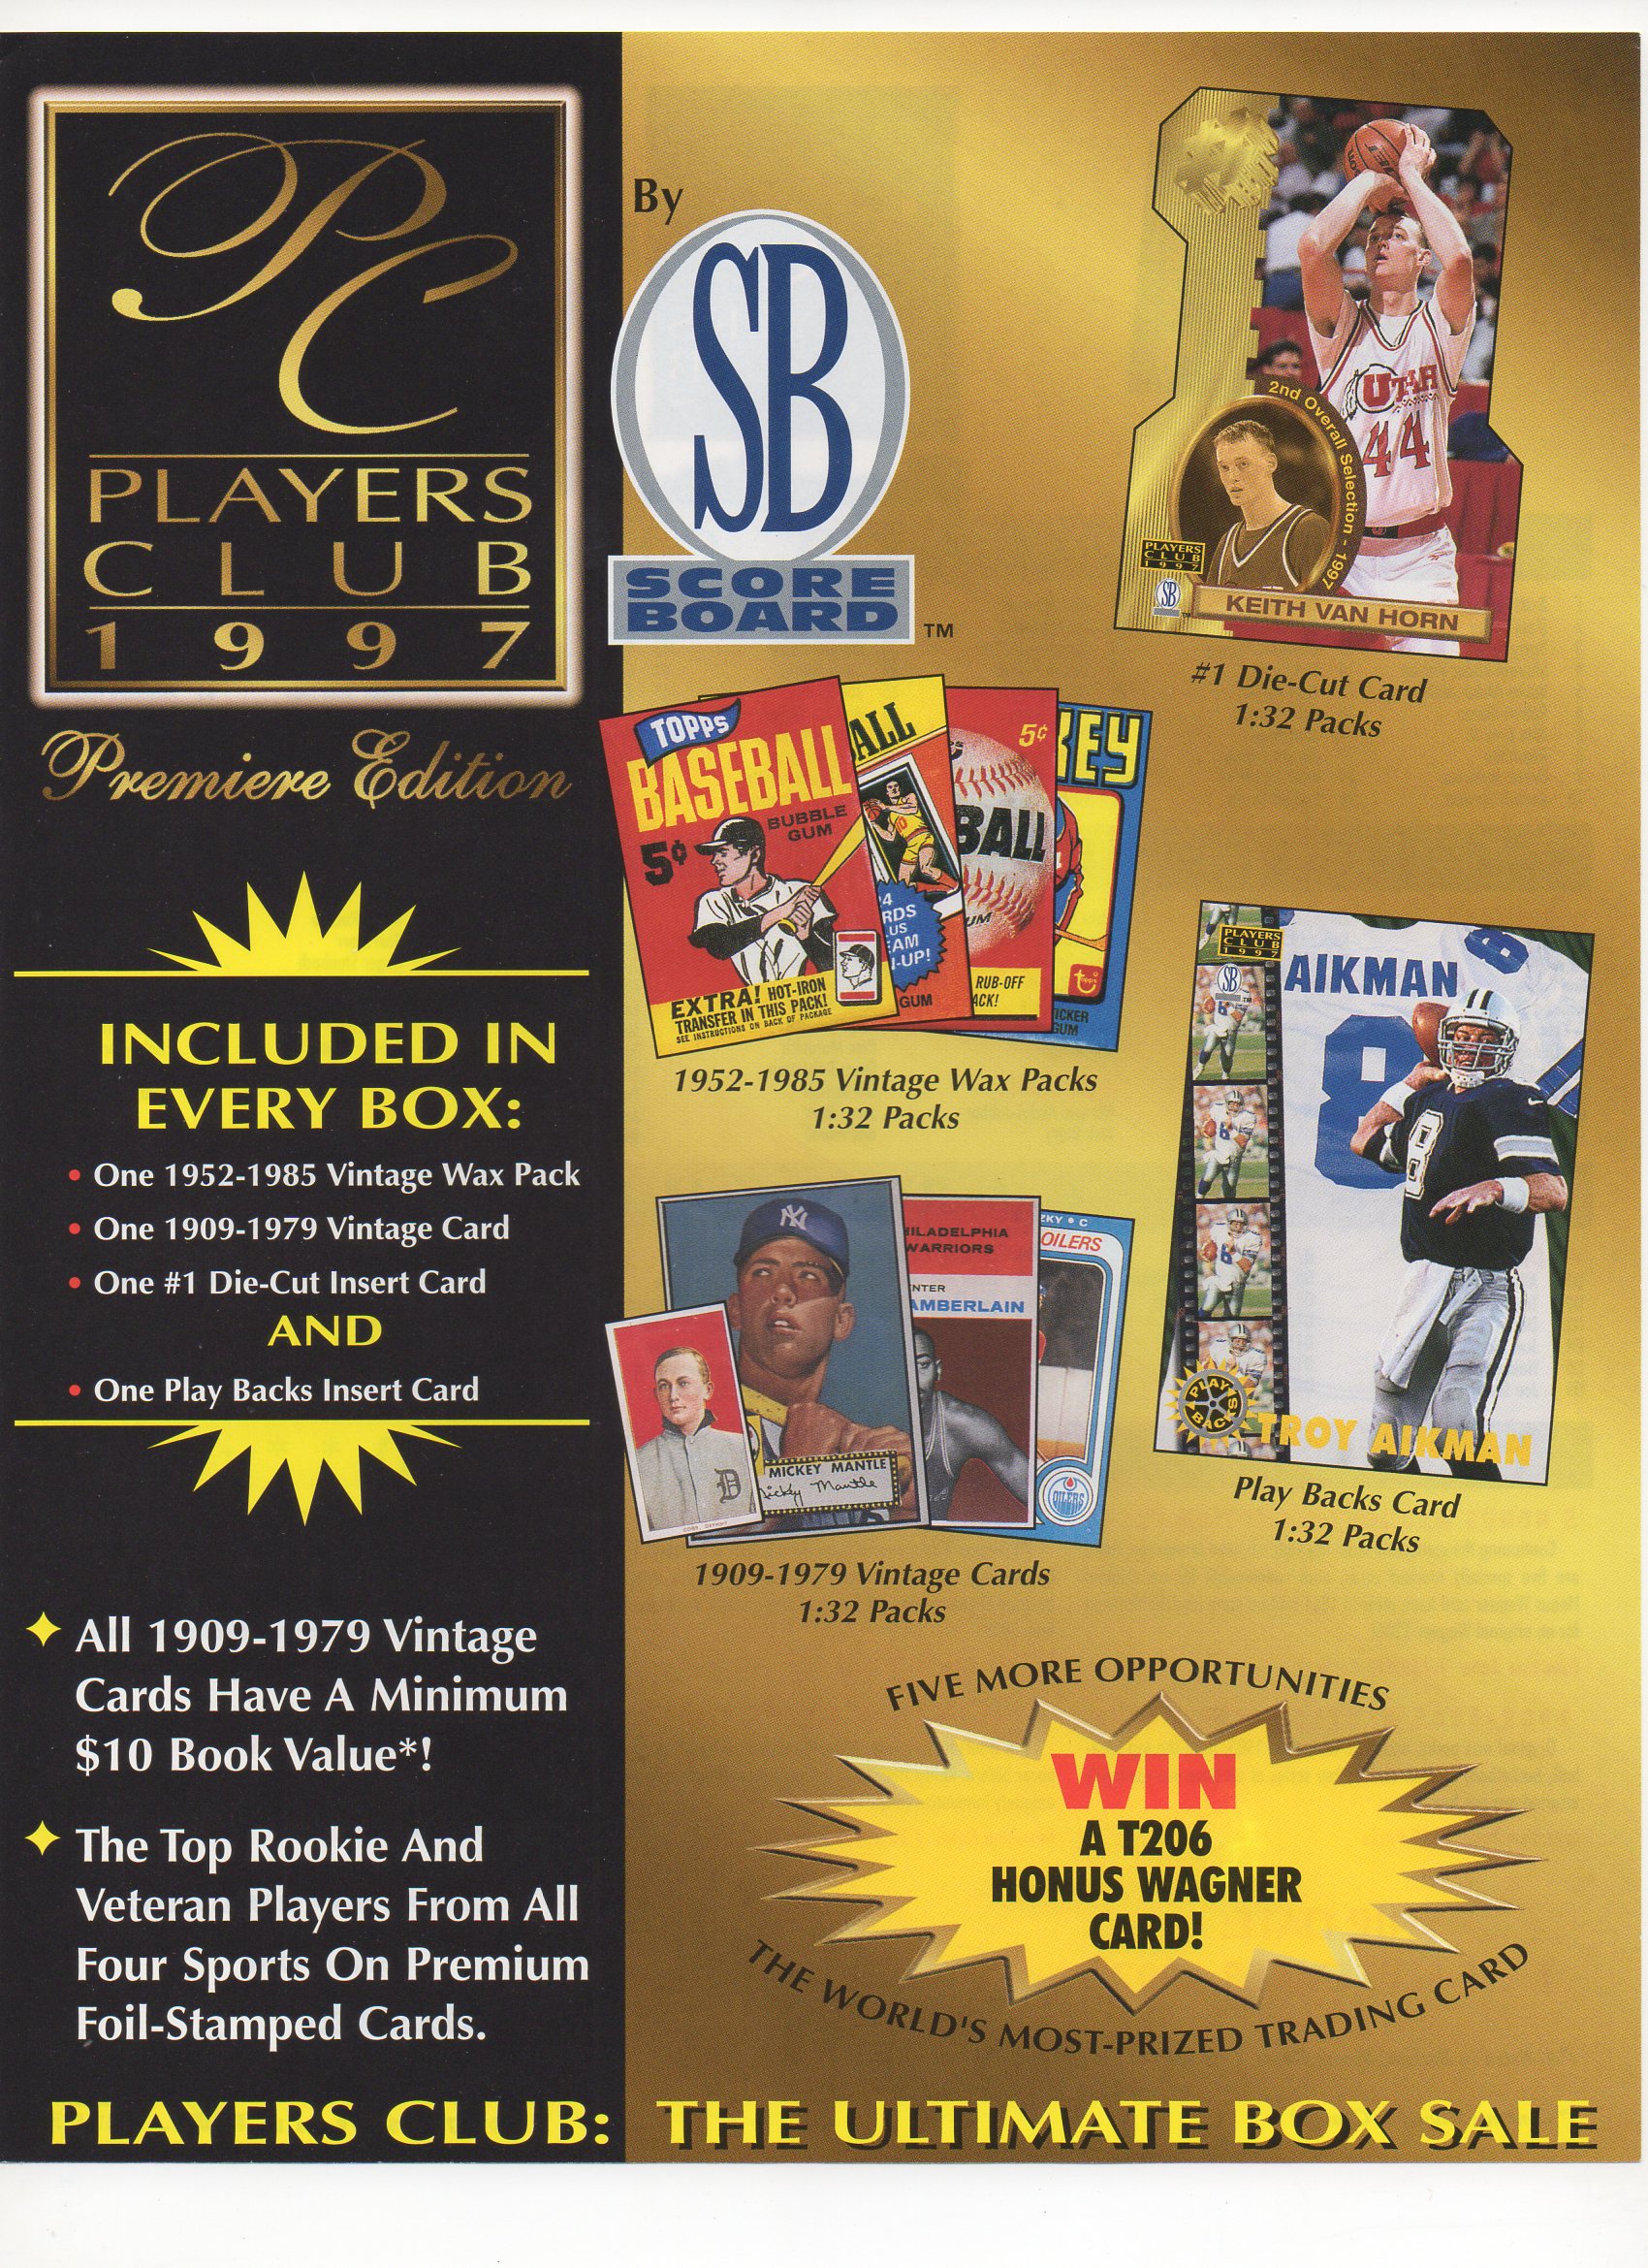 1997 players club, 2 sided flyer